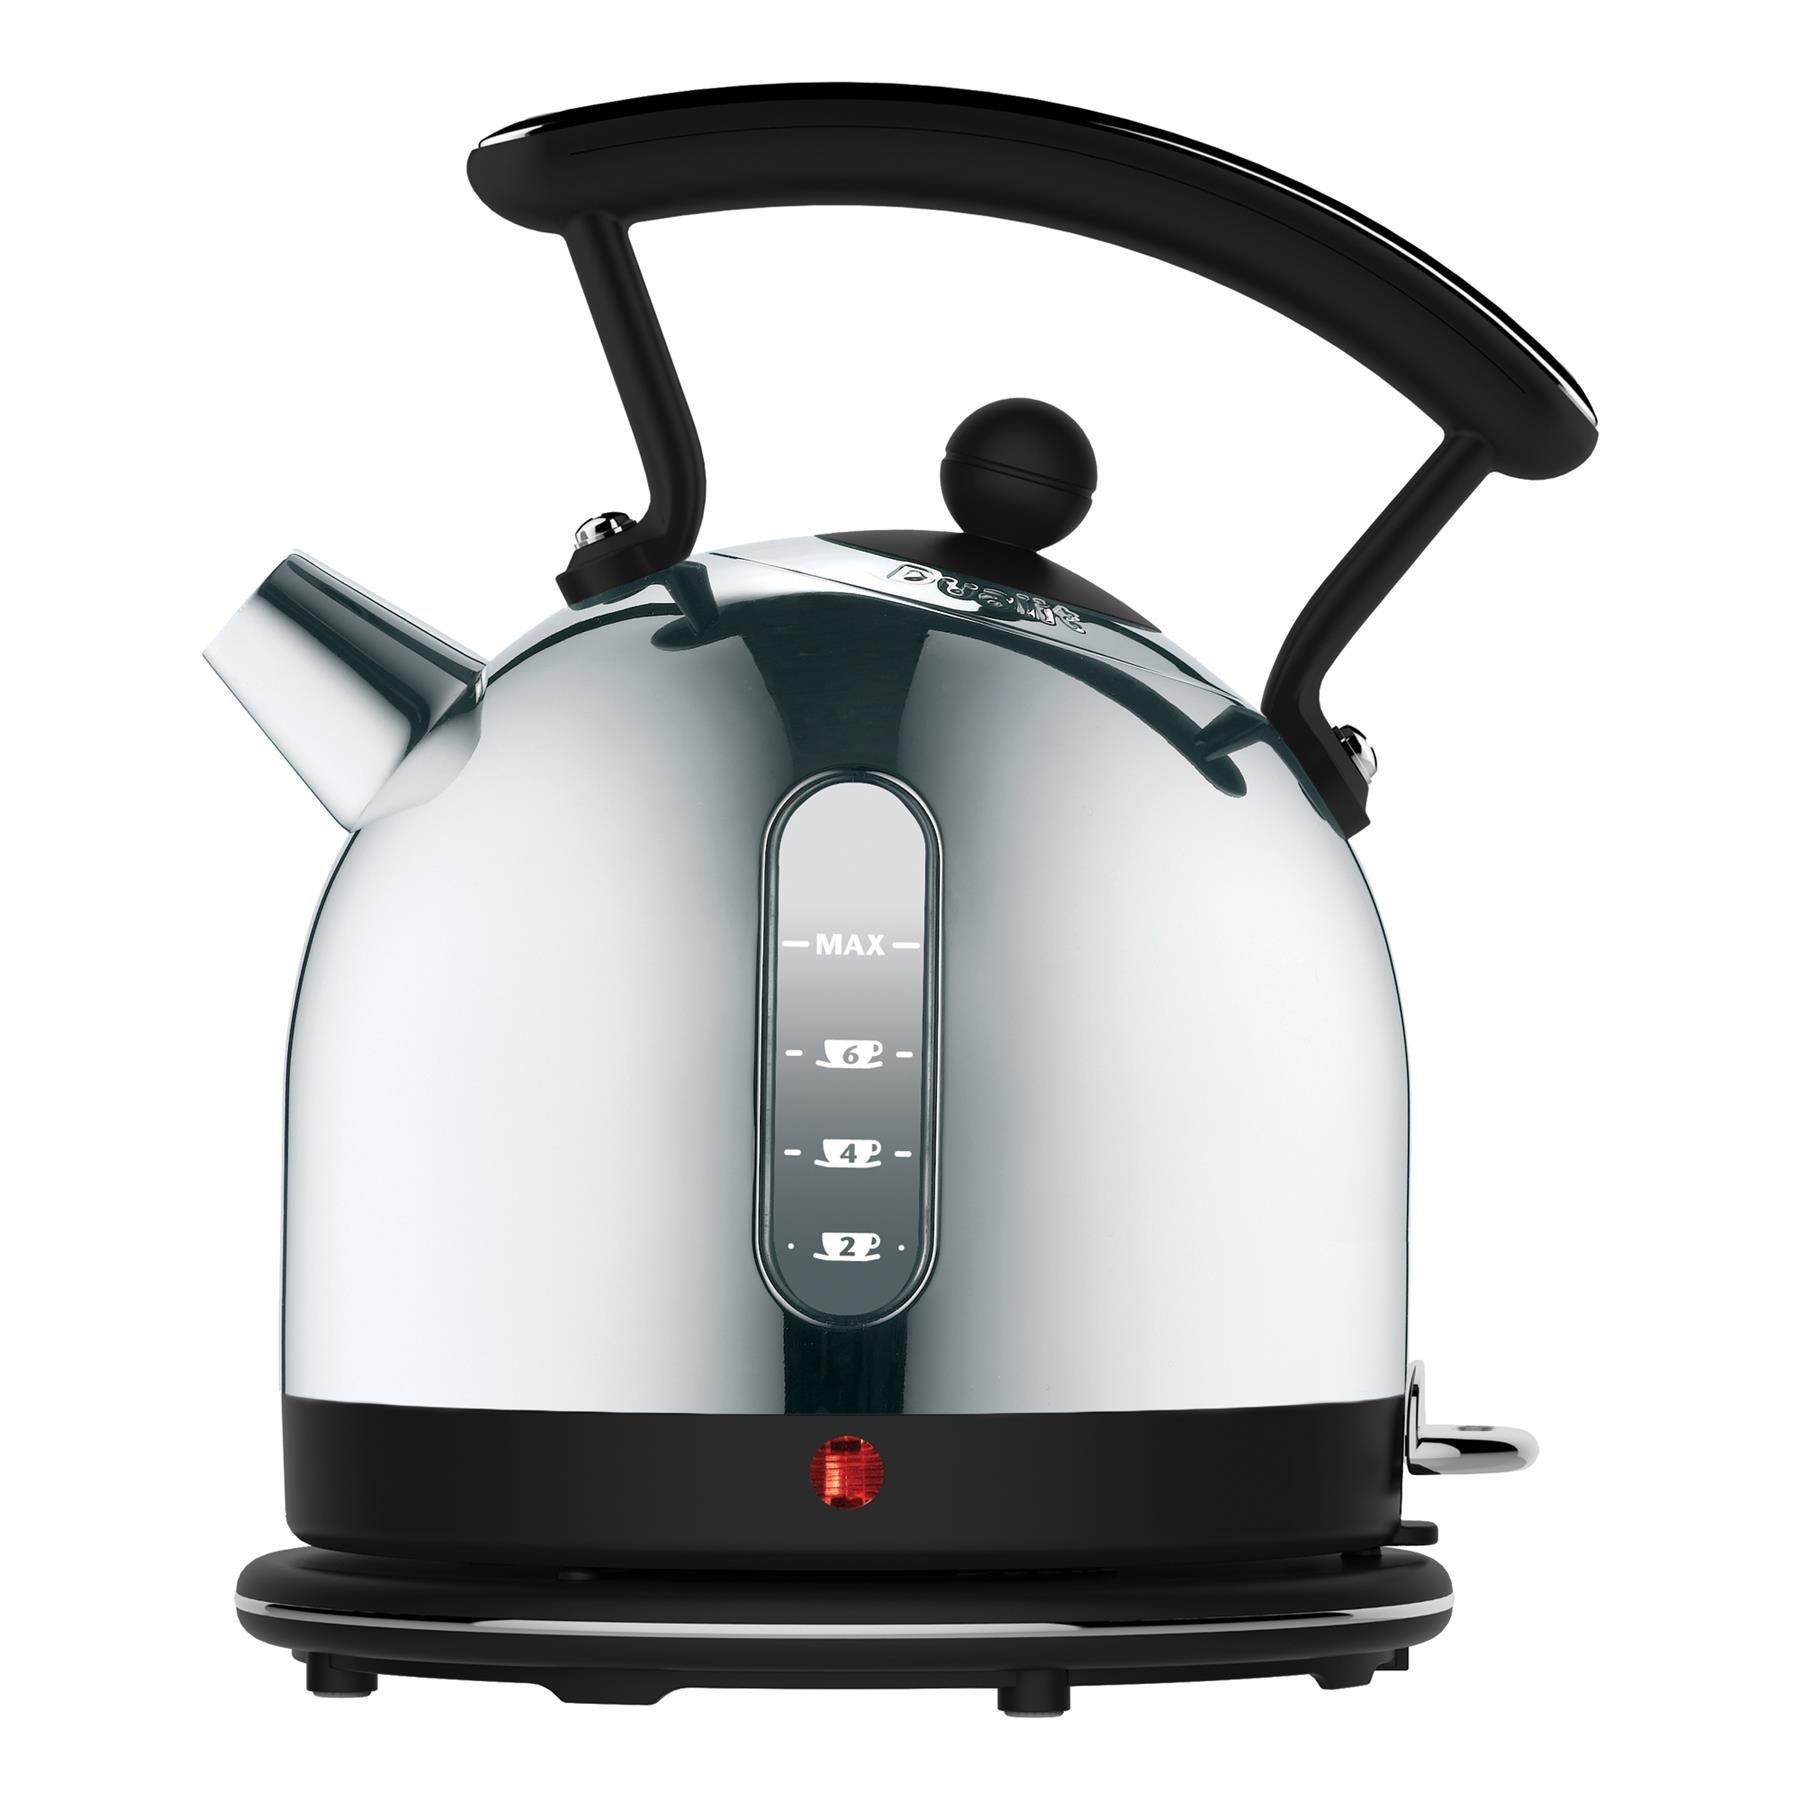 Cordless Dome Kettle